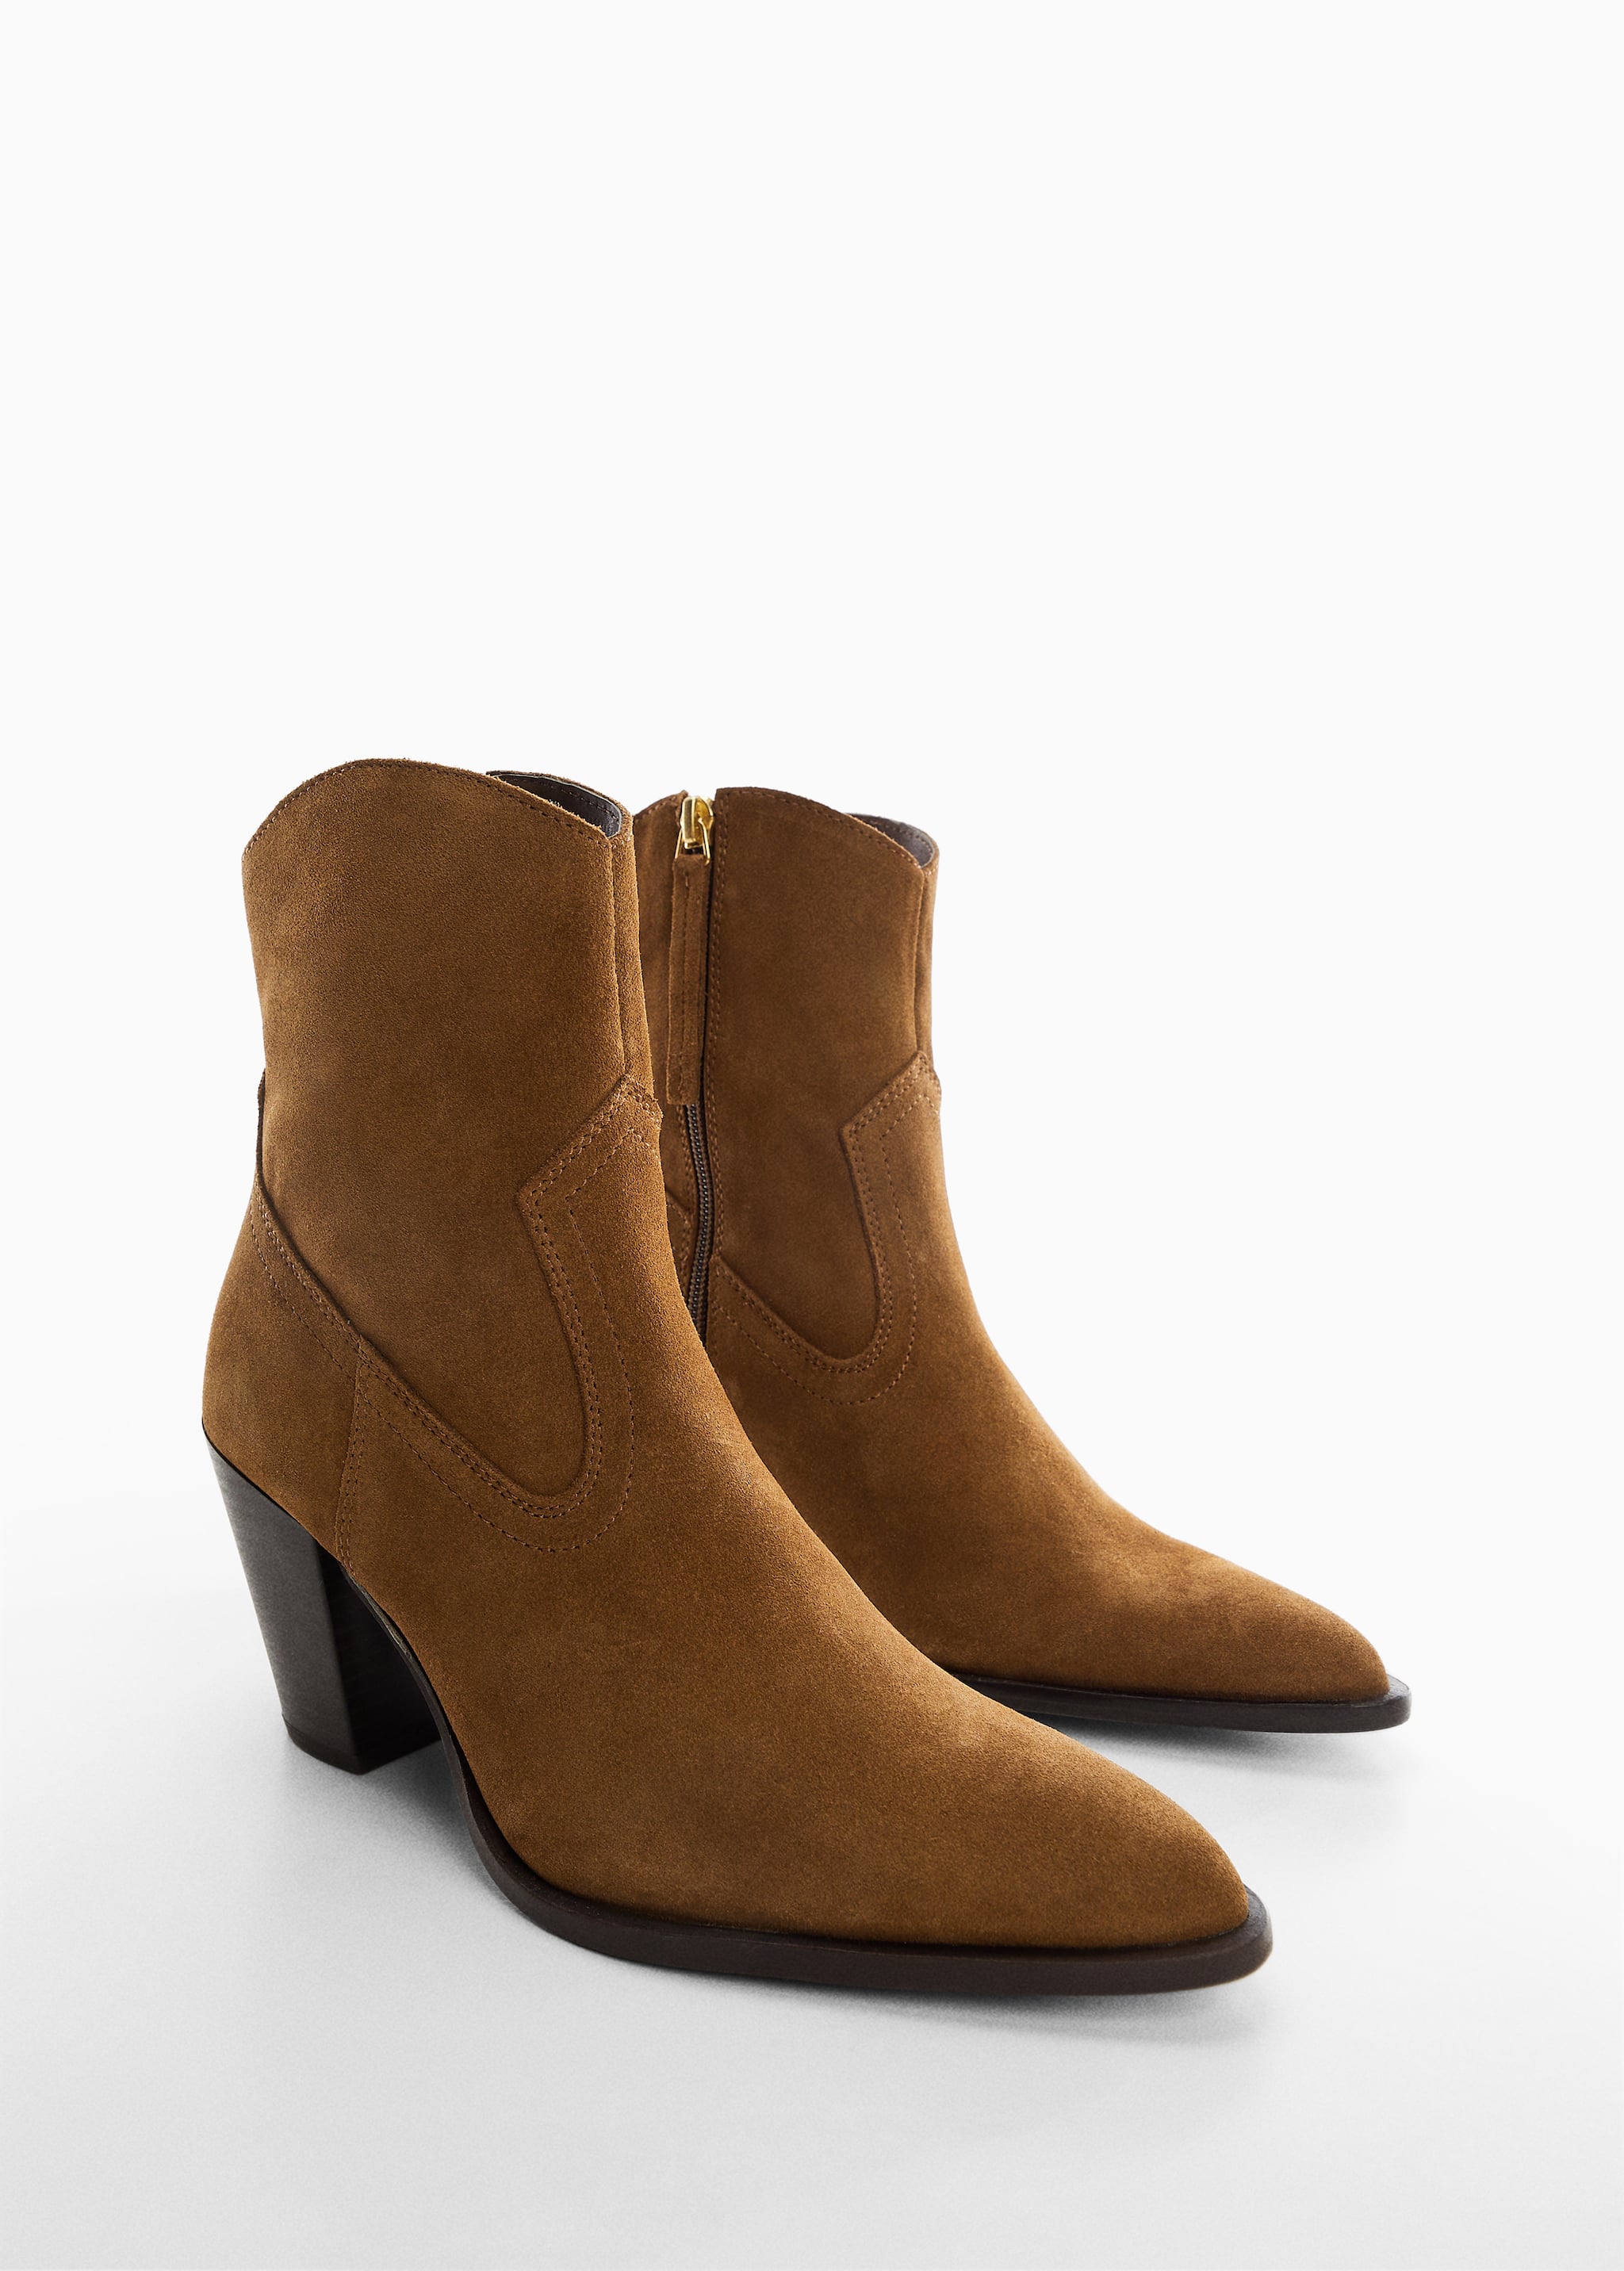 Suede leather ankle boots - Medium plane